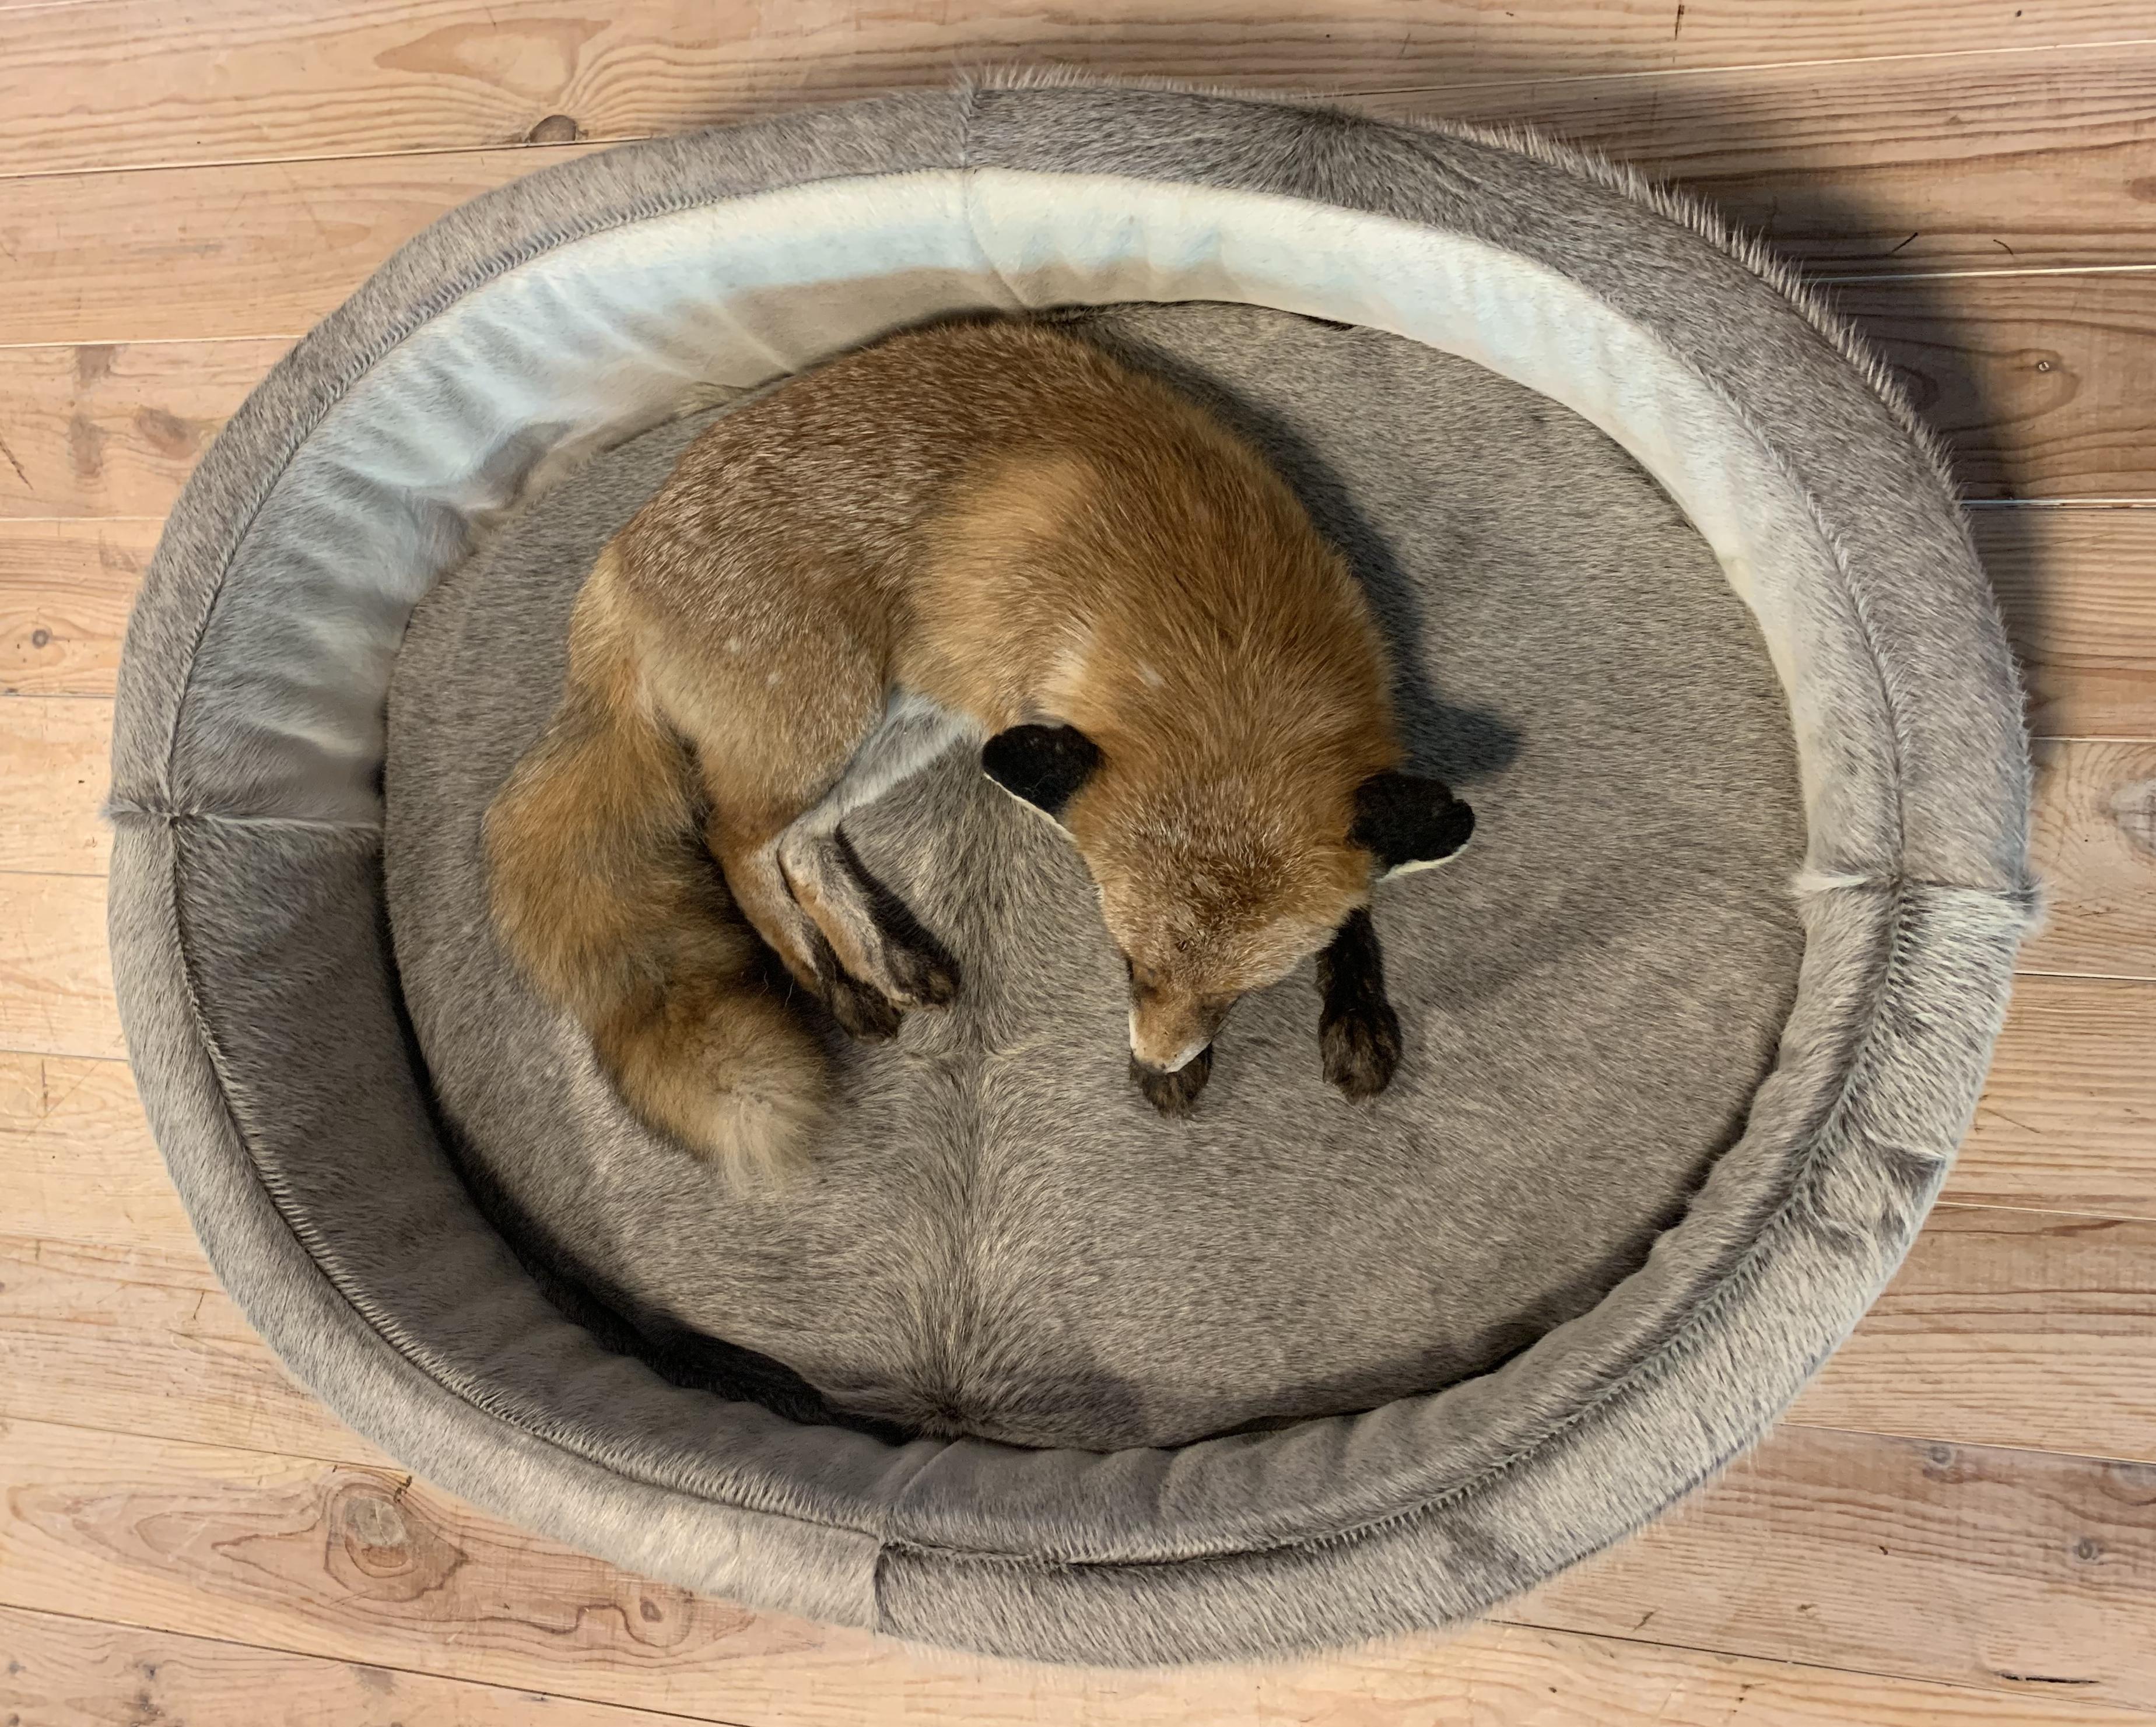 Luxurious handmade dog bed made of special gray cowhide.
The dog bed is offered without the fox.